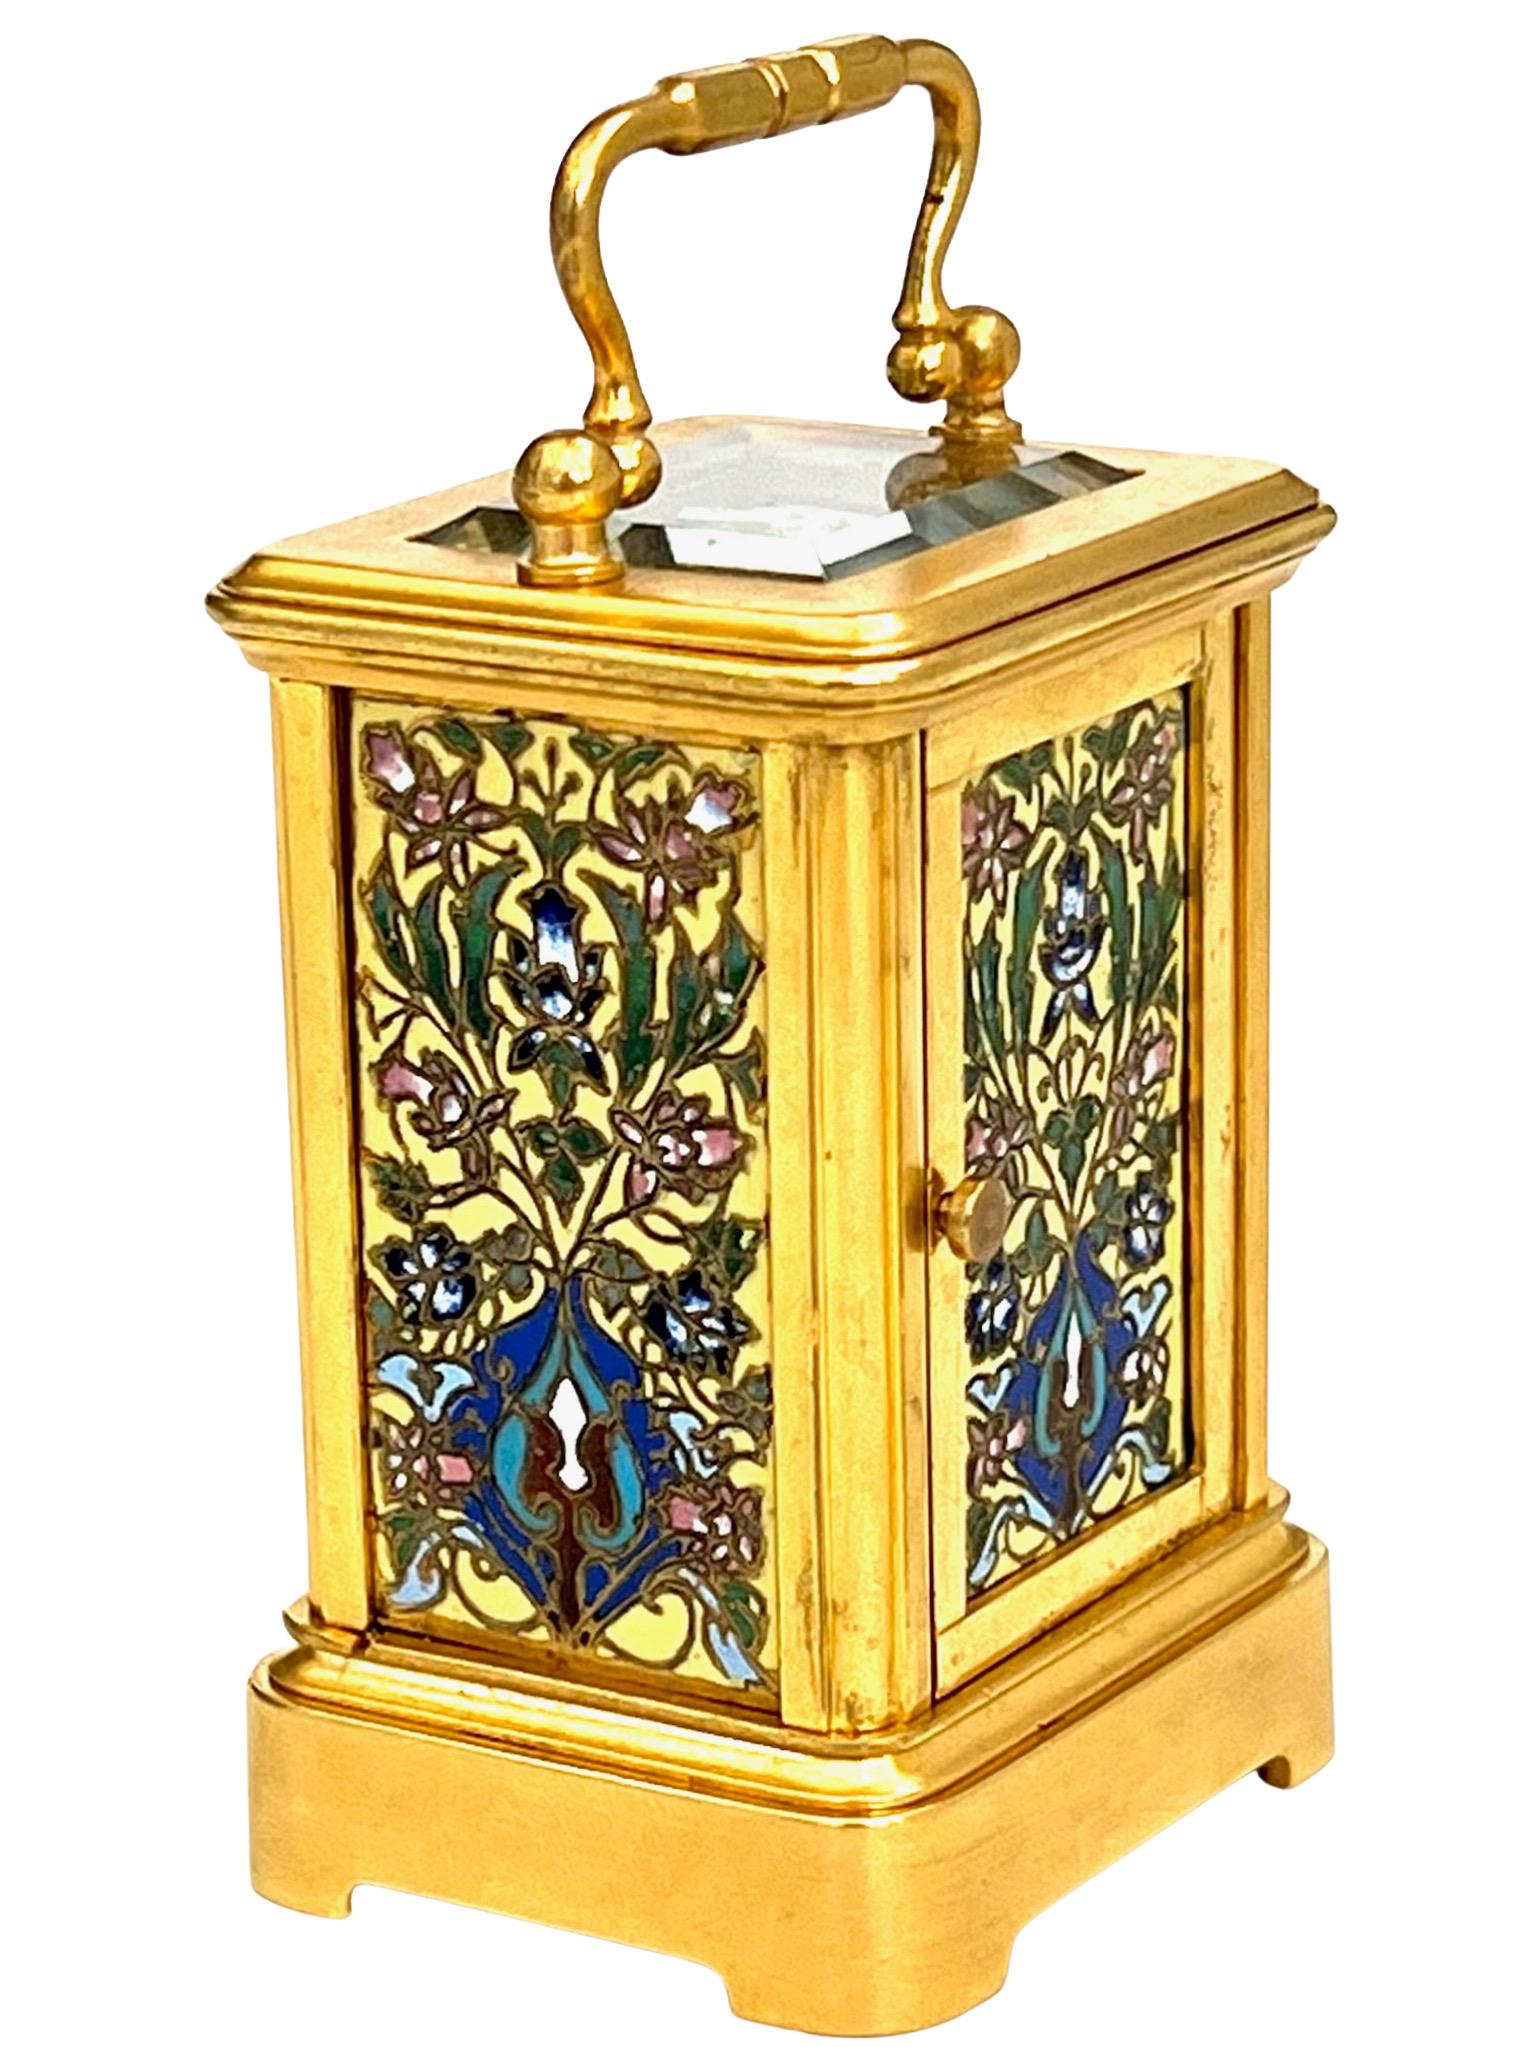 Brass French Miniature Timepiece 8 Day Carriage Clock With Champlevé Enamel Panels For Sale